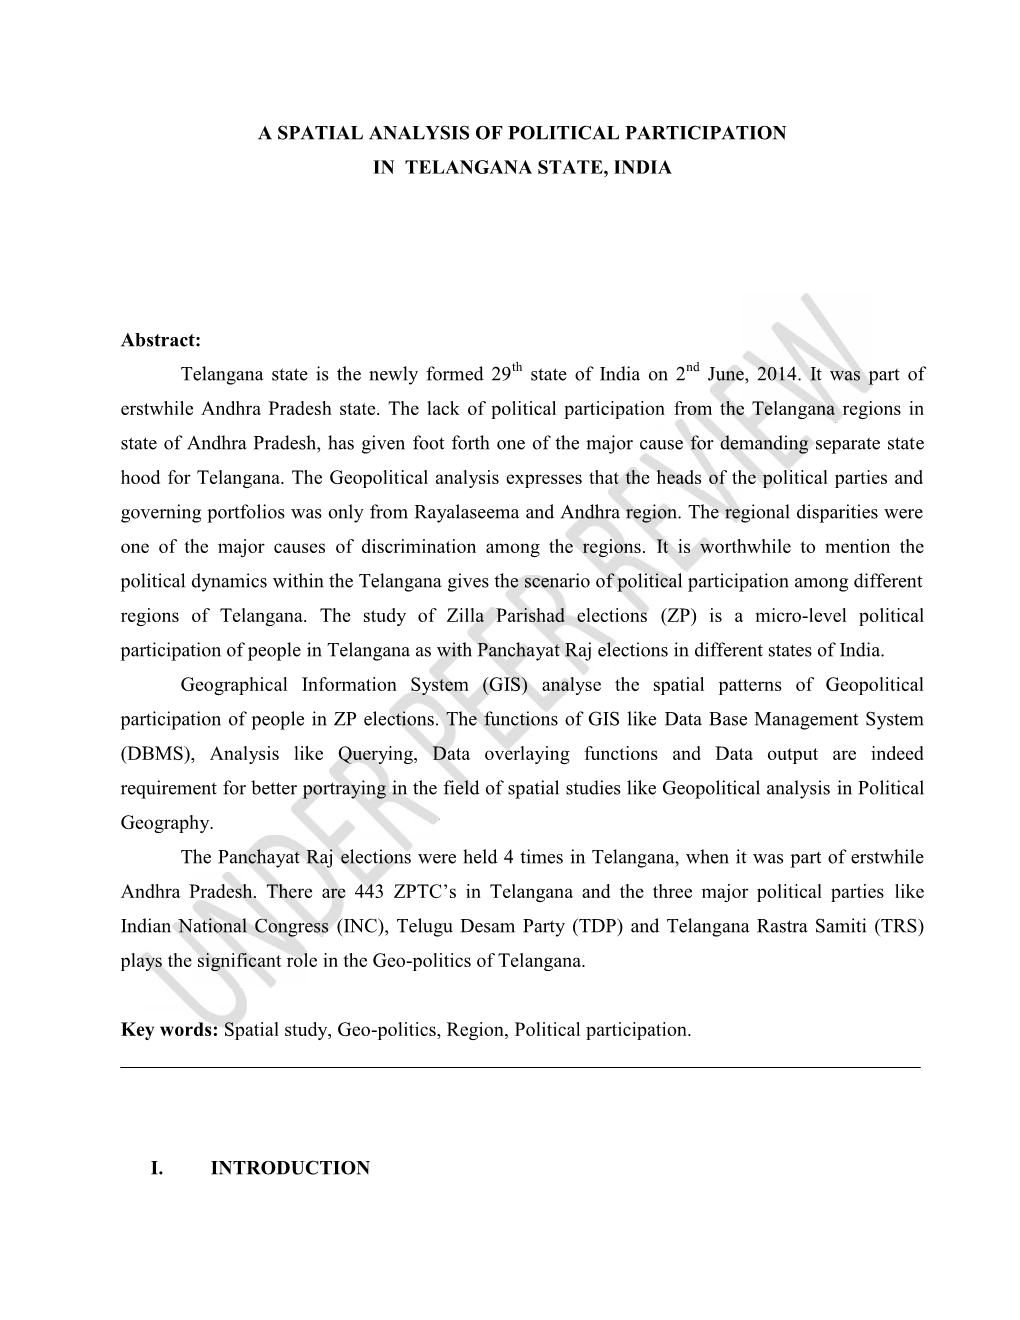 A Spatial Analysis of Political Participation in Telangana State, India